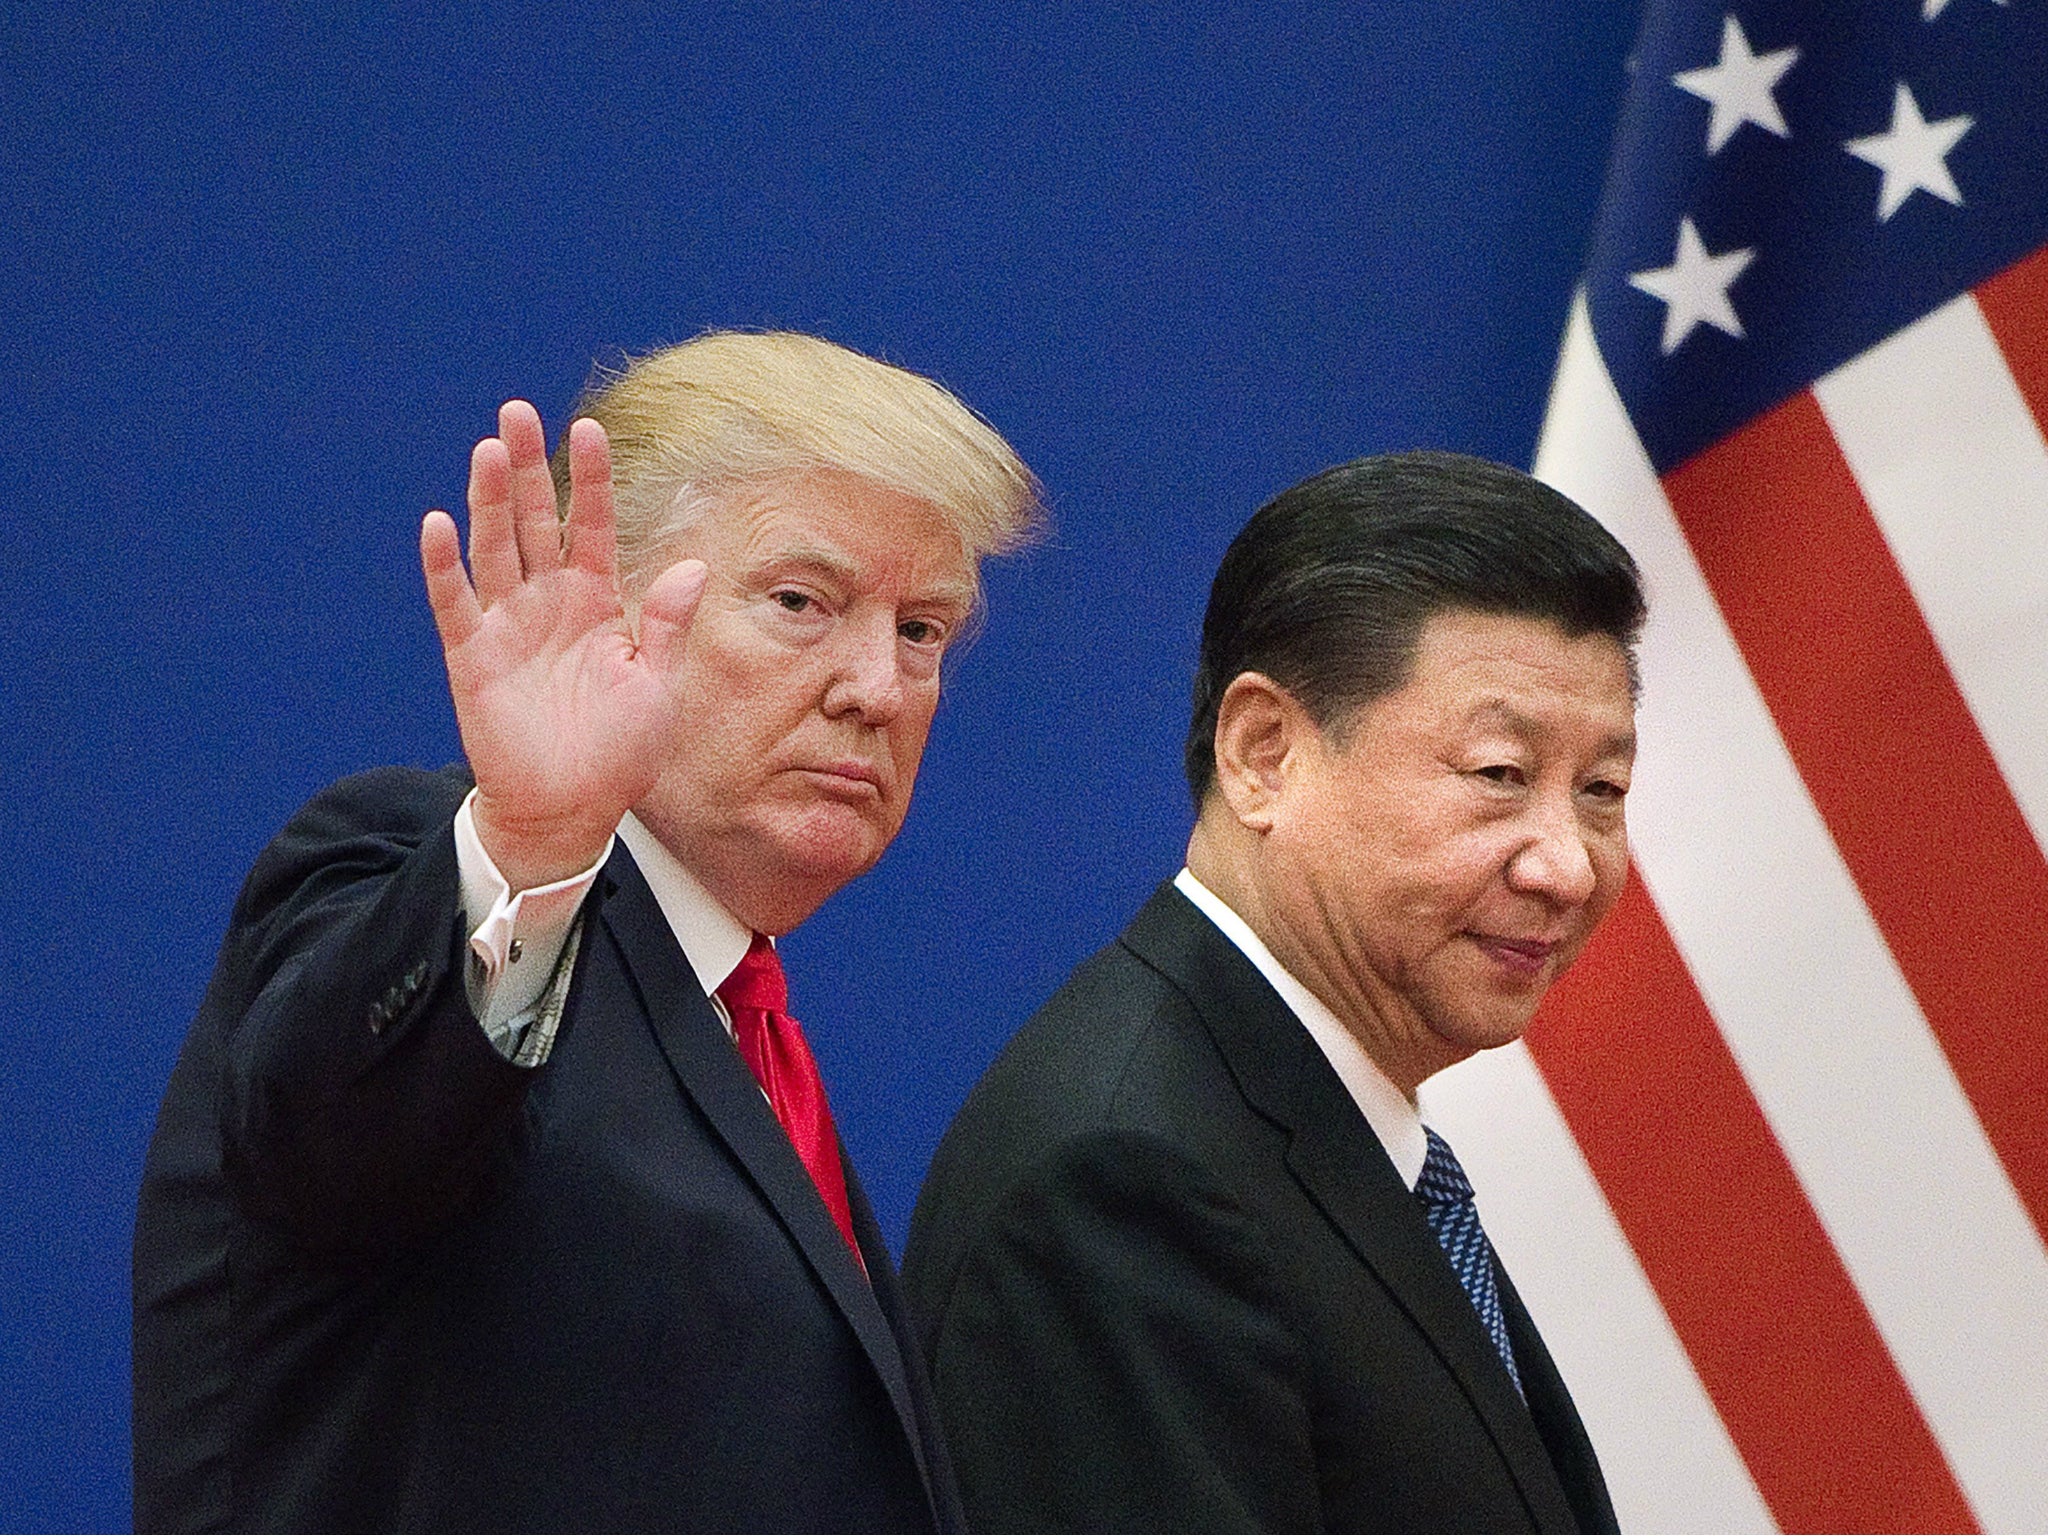 US president Donald Trump and Chinese president Xi Jinping. The US is starting to clamp down on Chinese citizens' visas amid neogtiations about bilateral trade and North Korea